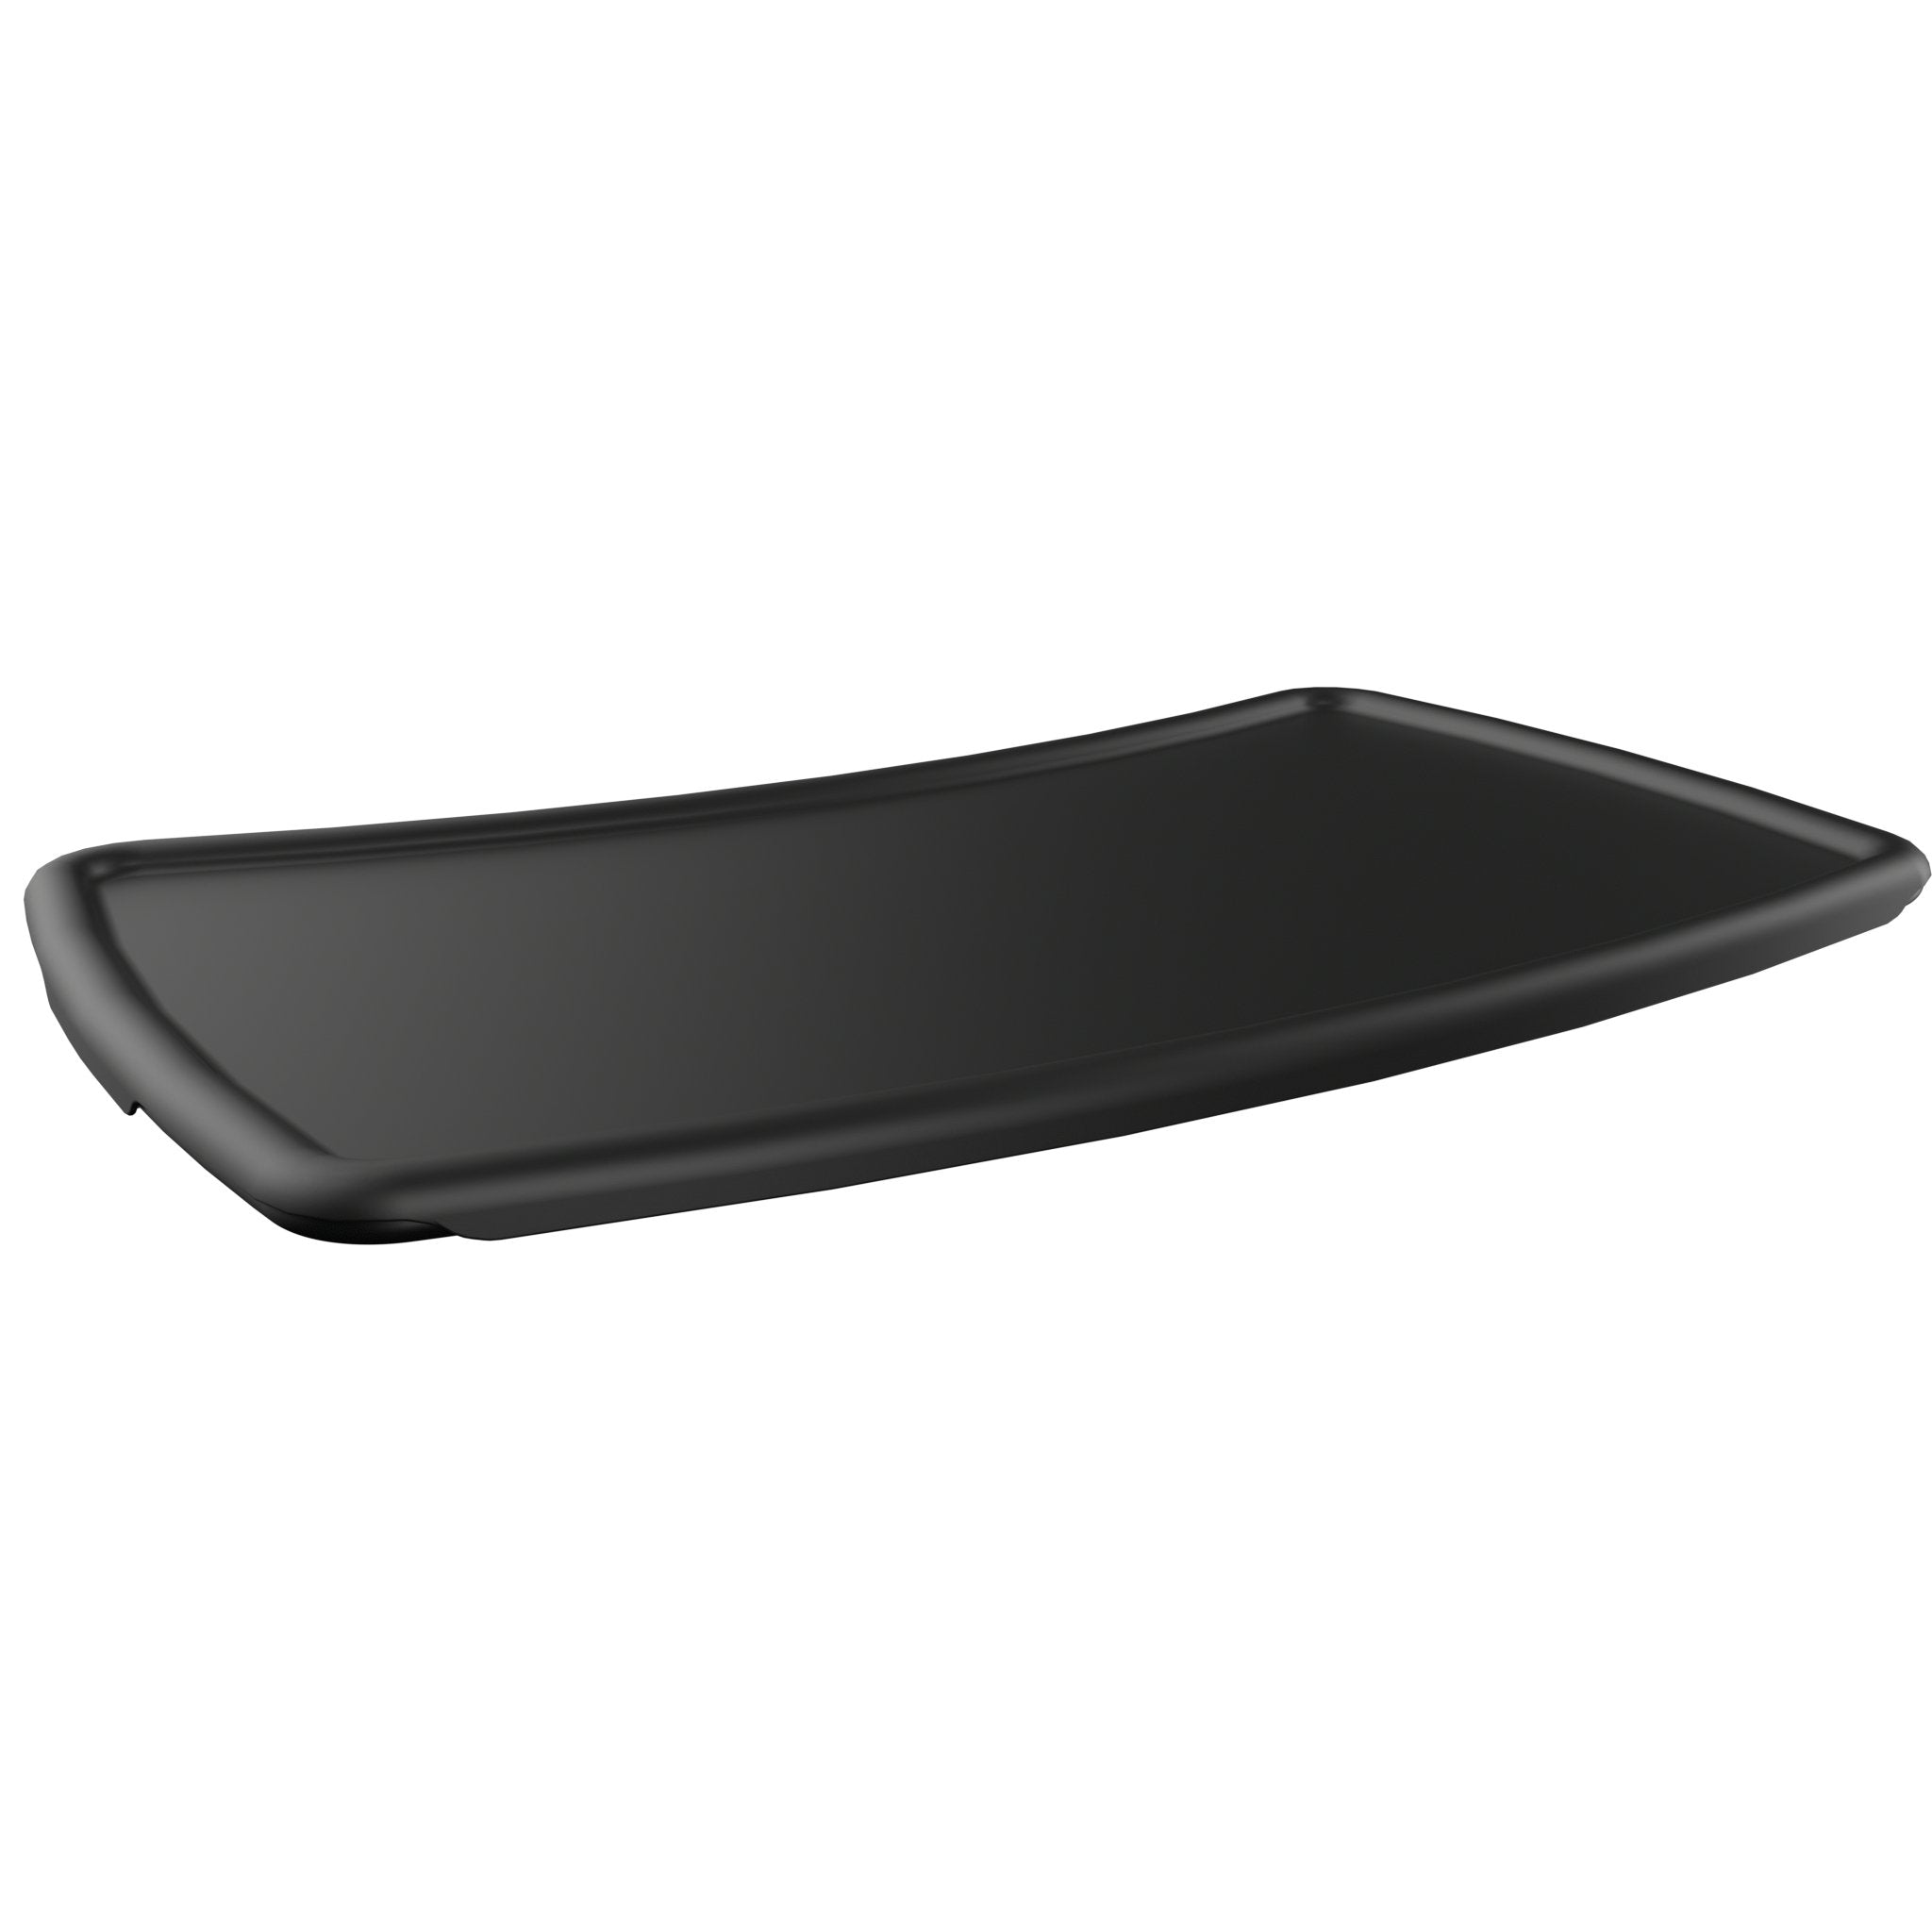 Melo Revel+ High Chair Tray Mat - ANB Baby -766429782254$20 - $50